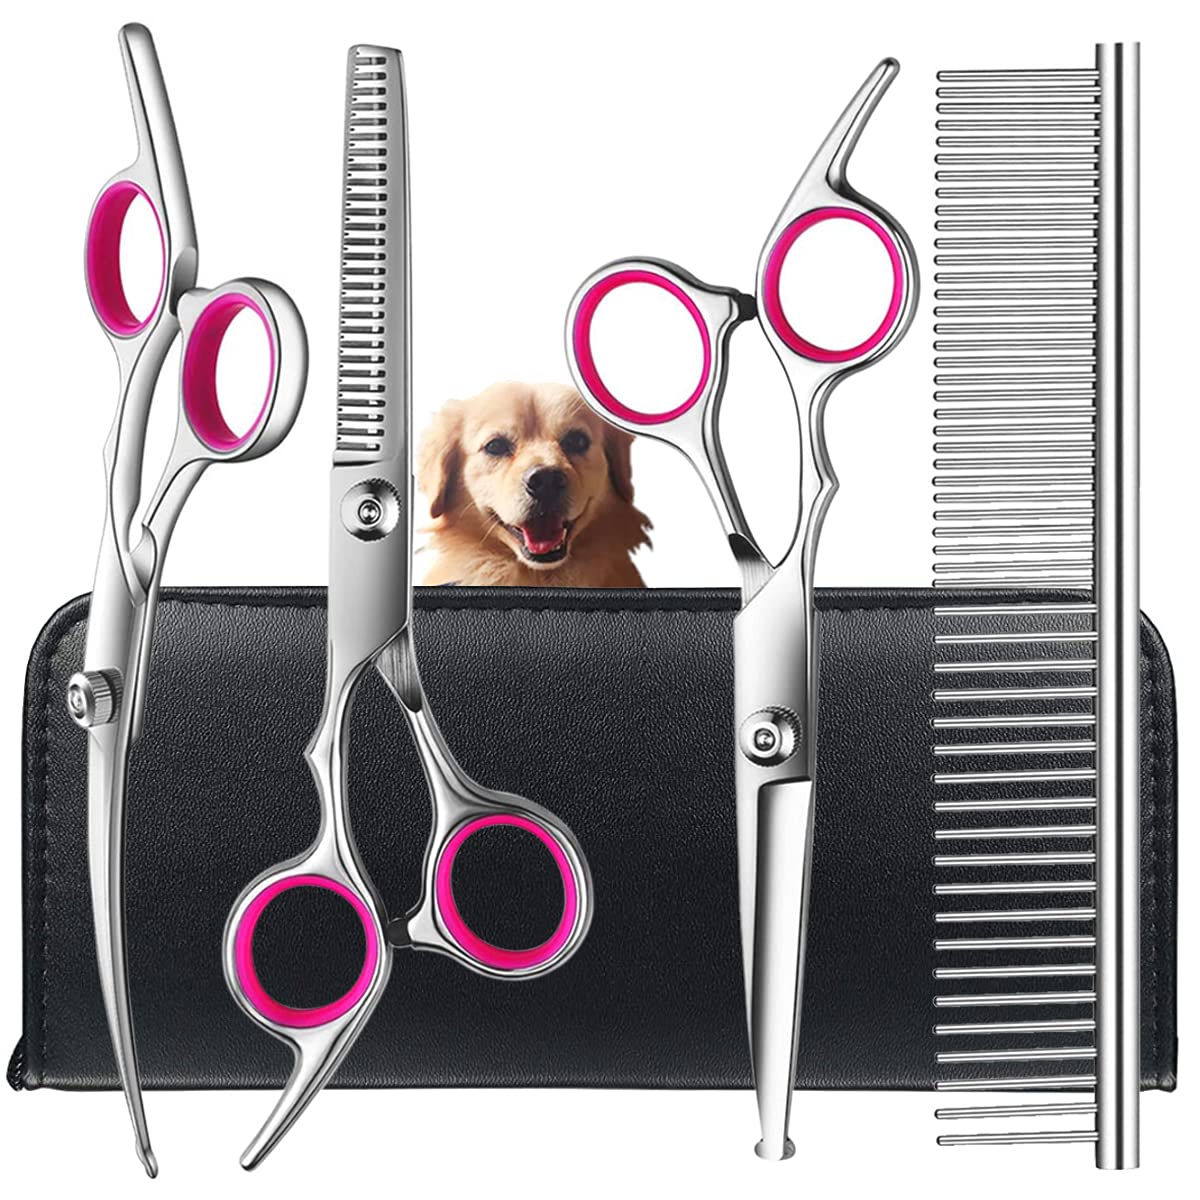 premium titanium coated dog grooming scissors with safety round tips professional grade kit for precise and safe trimming